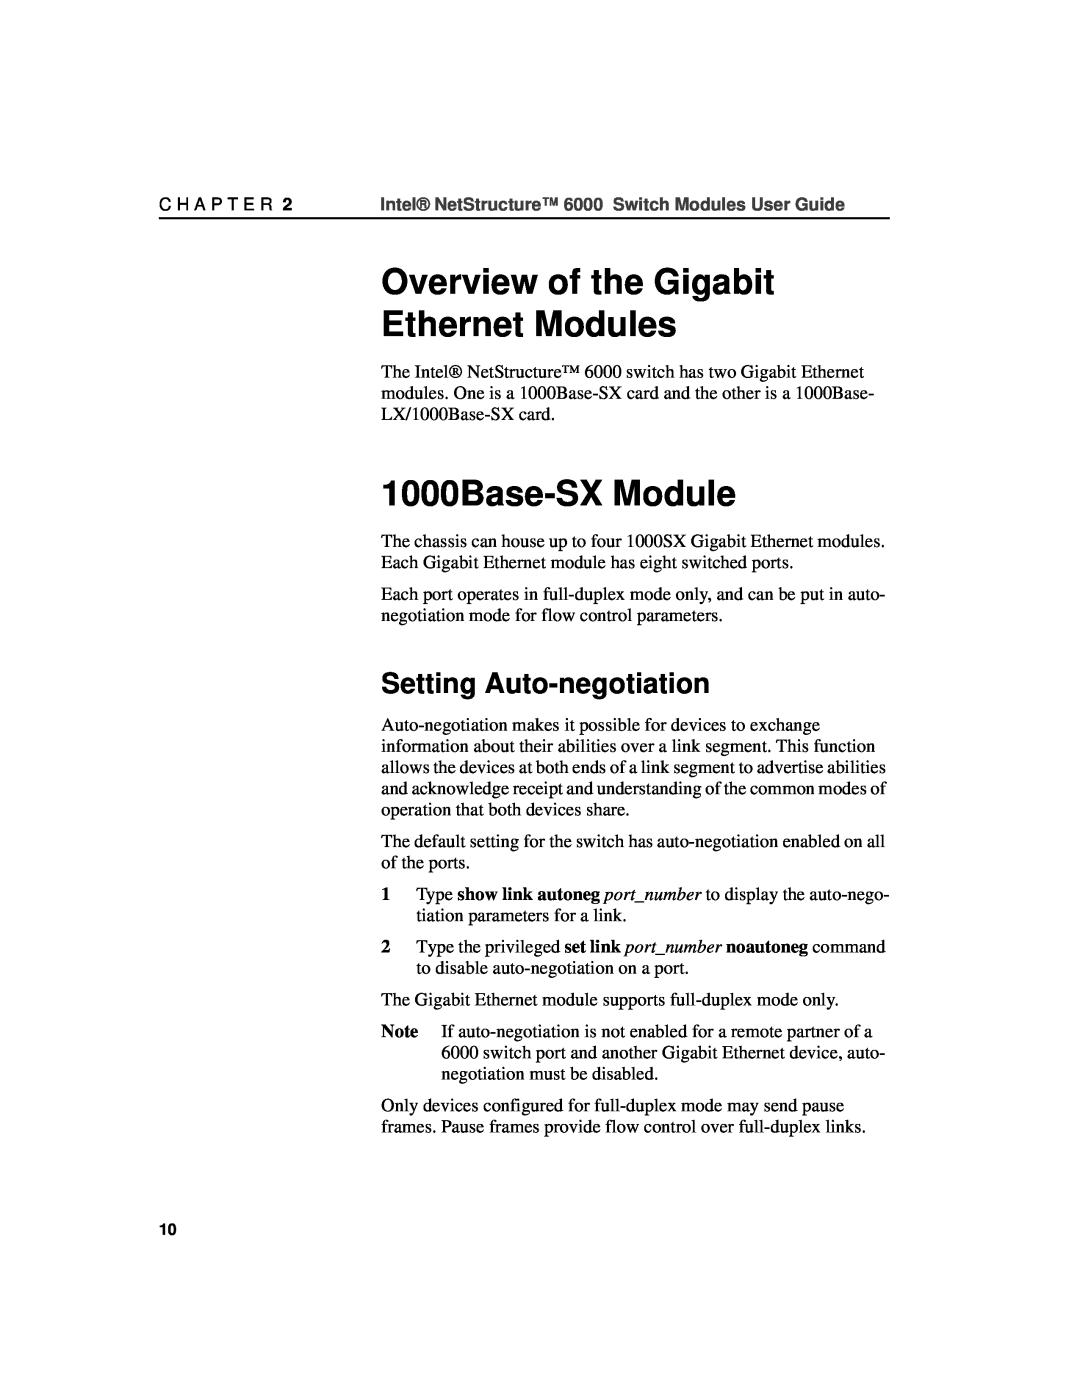 Intel A21721-001 manual Overview of the Gigabit Ethernet Modules, 1000Base-SX Module, Setting Auto-negotiation 